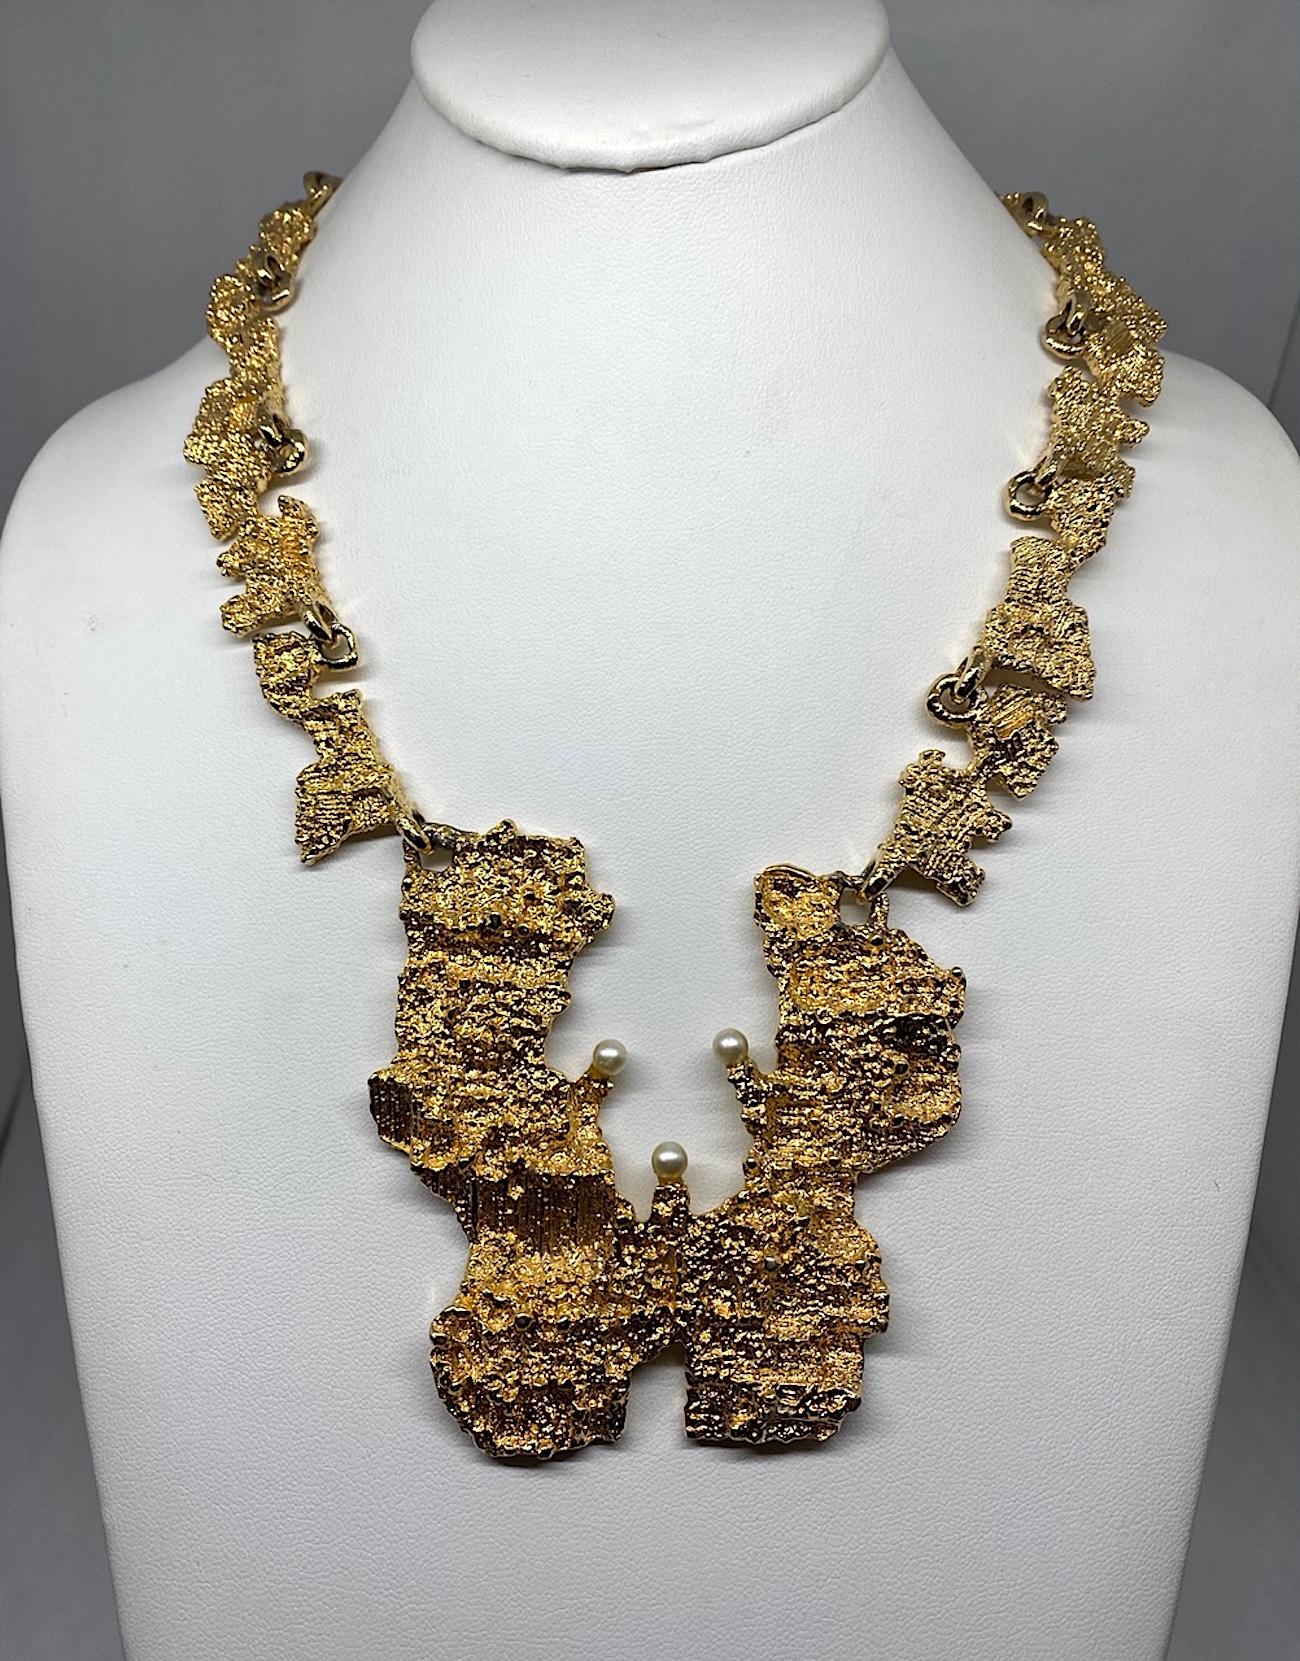 A wearable pieces sculpture is this 1970s brutalist gold plate necklace. The pendant and links are sculpted with a rough gold nugget texture in gold plate and accented with three faux pearls. The large pendant is 3.25 inches wide and 3.38 inches